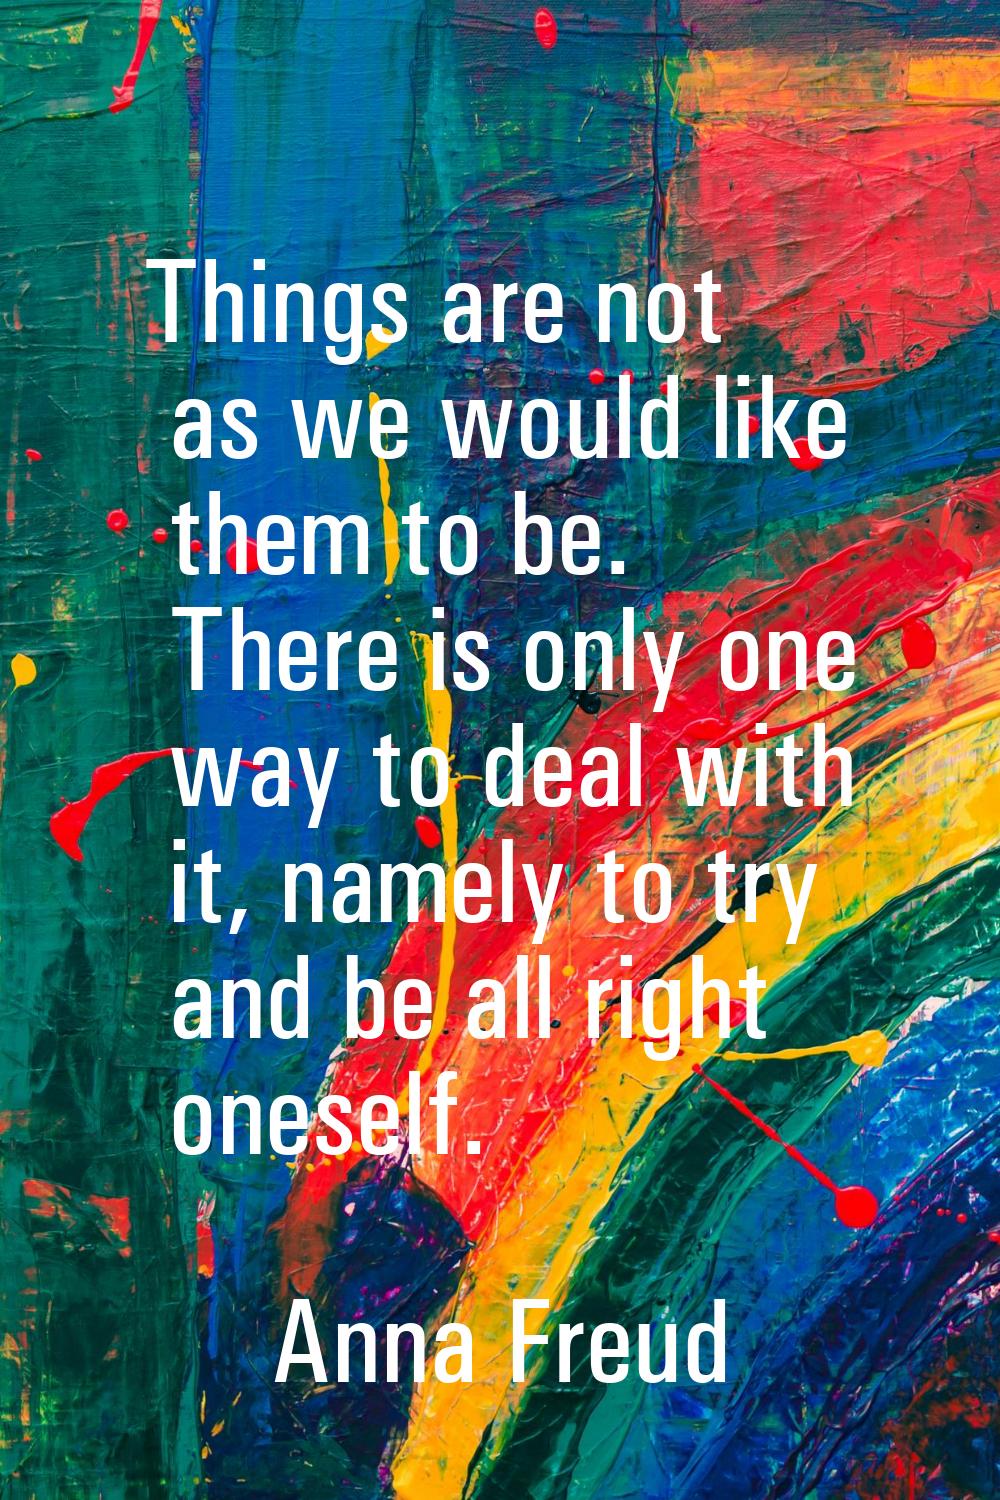 Things are not as we would like them to be. There is only one way to deal with it, namely to try an